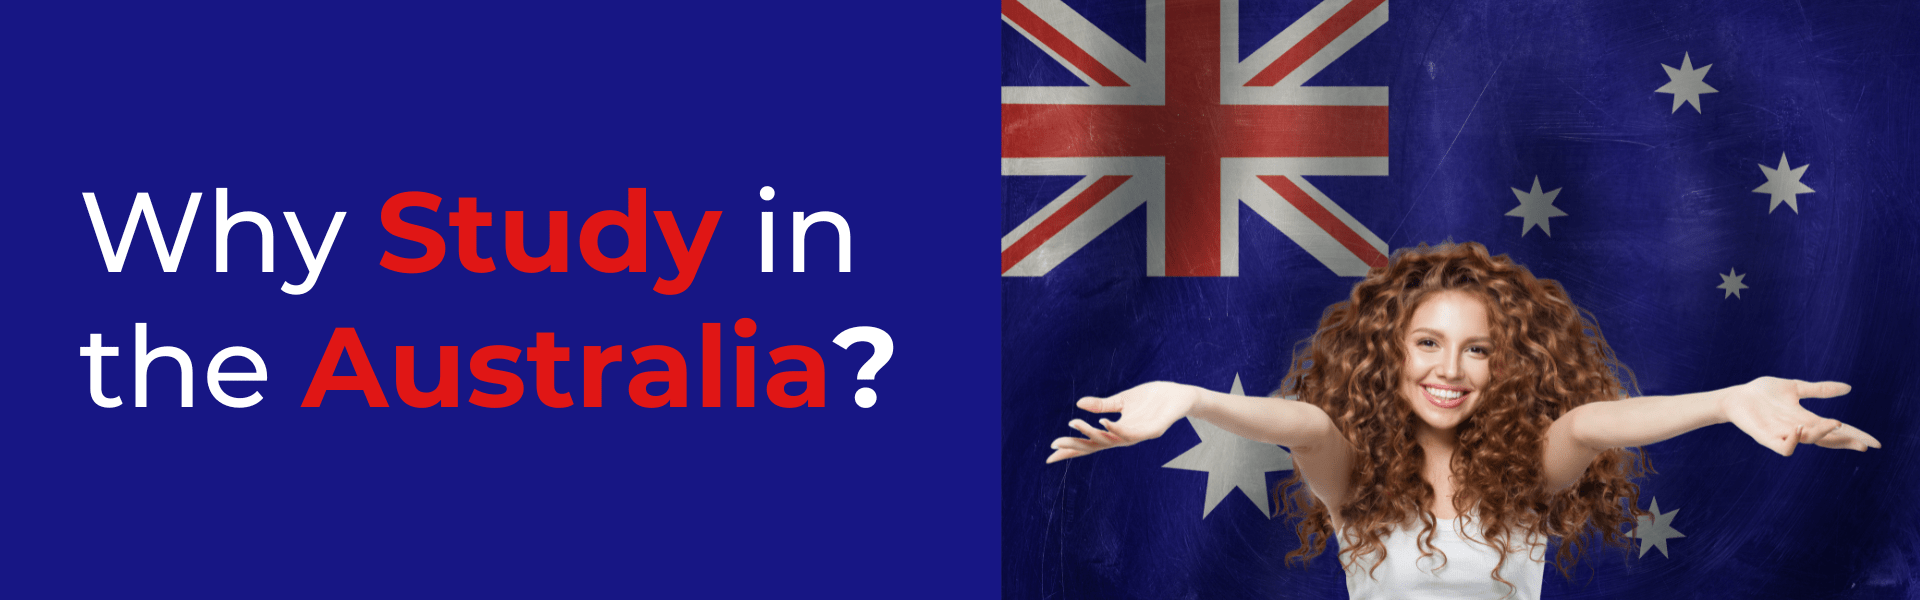 Why-Study-in-the-Australia-header-image